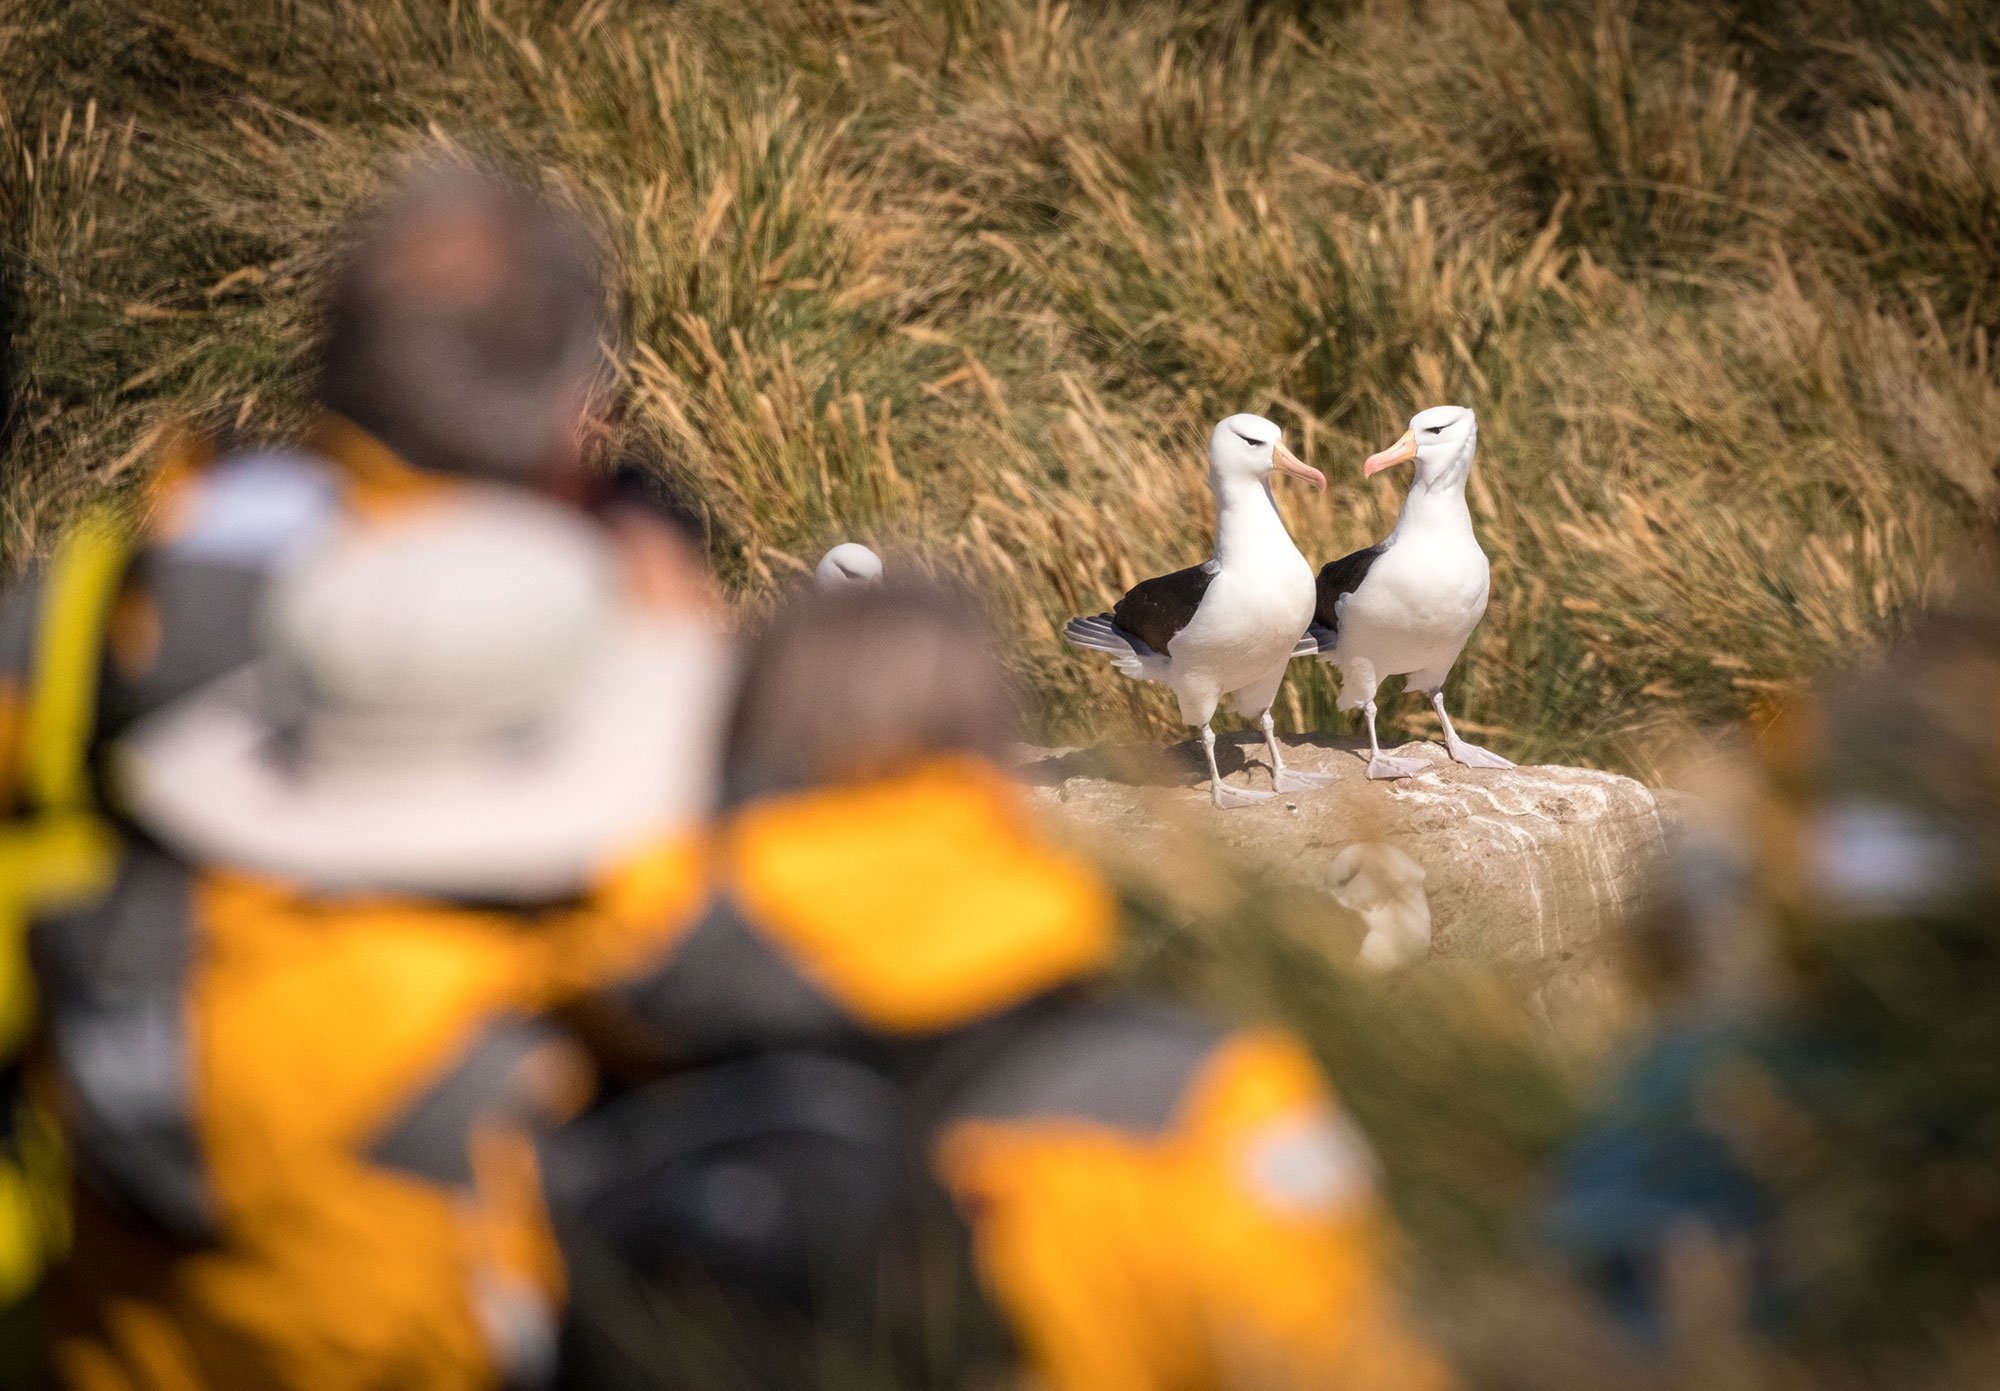 Black-browed albatross entrance Quark Expeditions guests at West Point in the Falkland Islands.